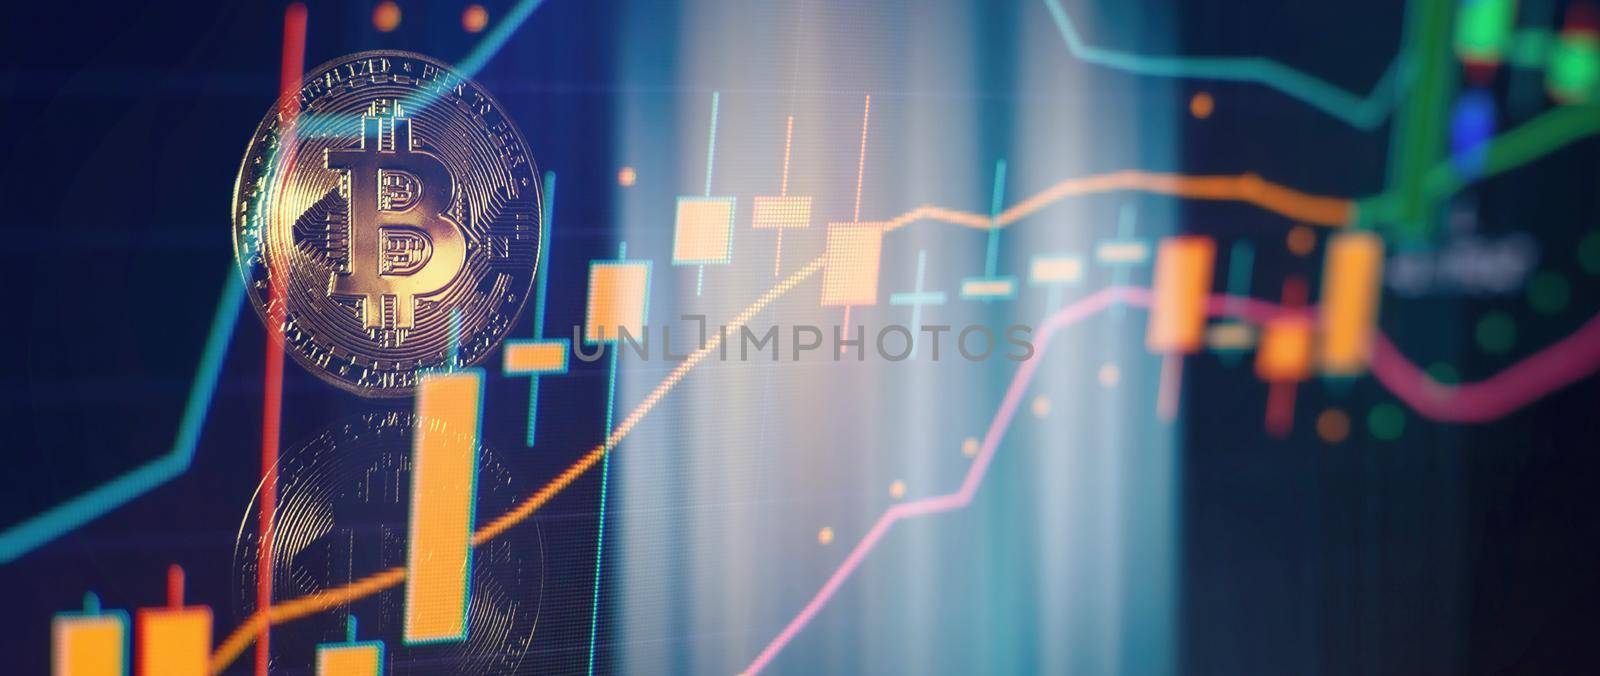 Bitcoins with Candle stick graph chart and digital background. Mining or block chain technology.